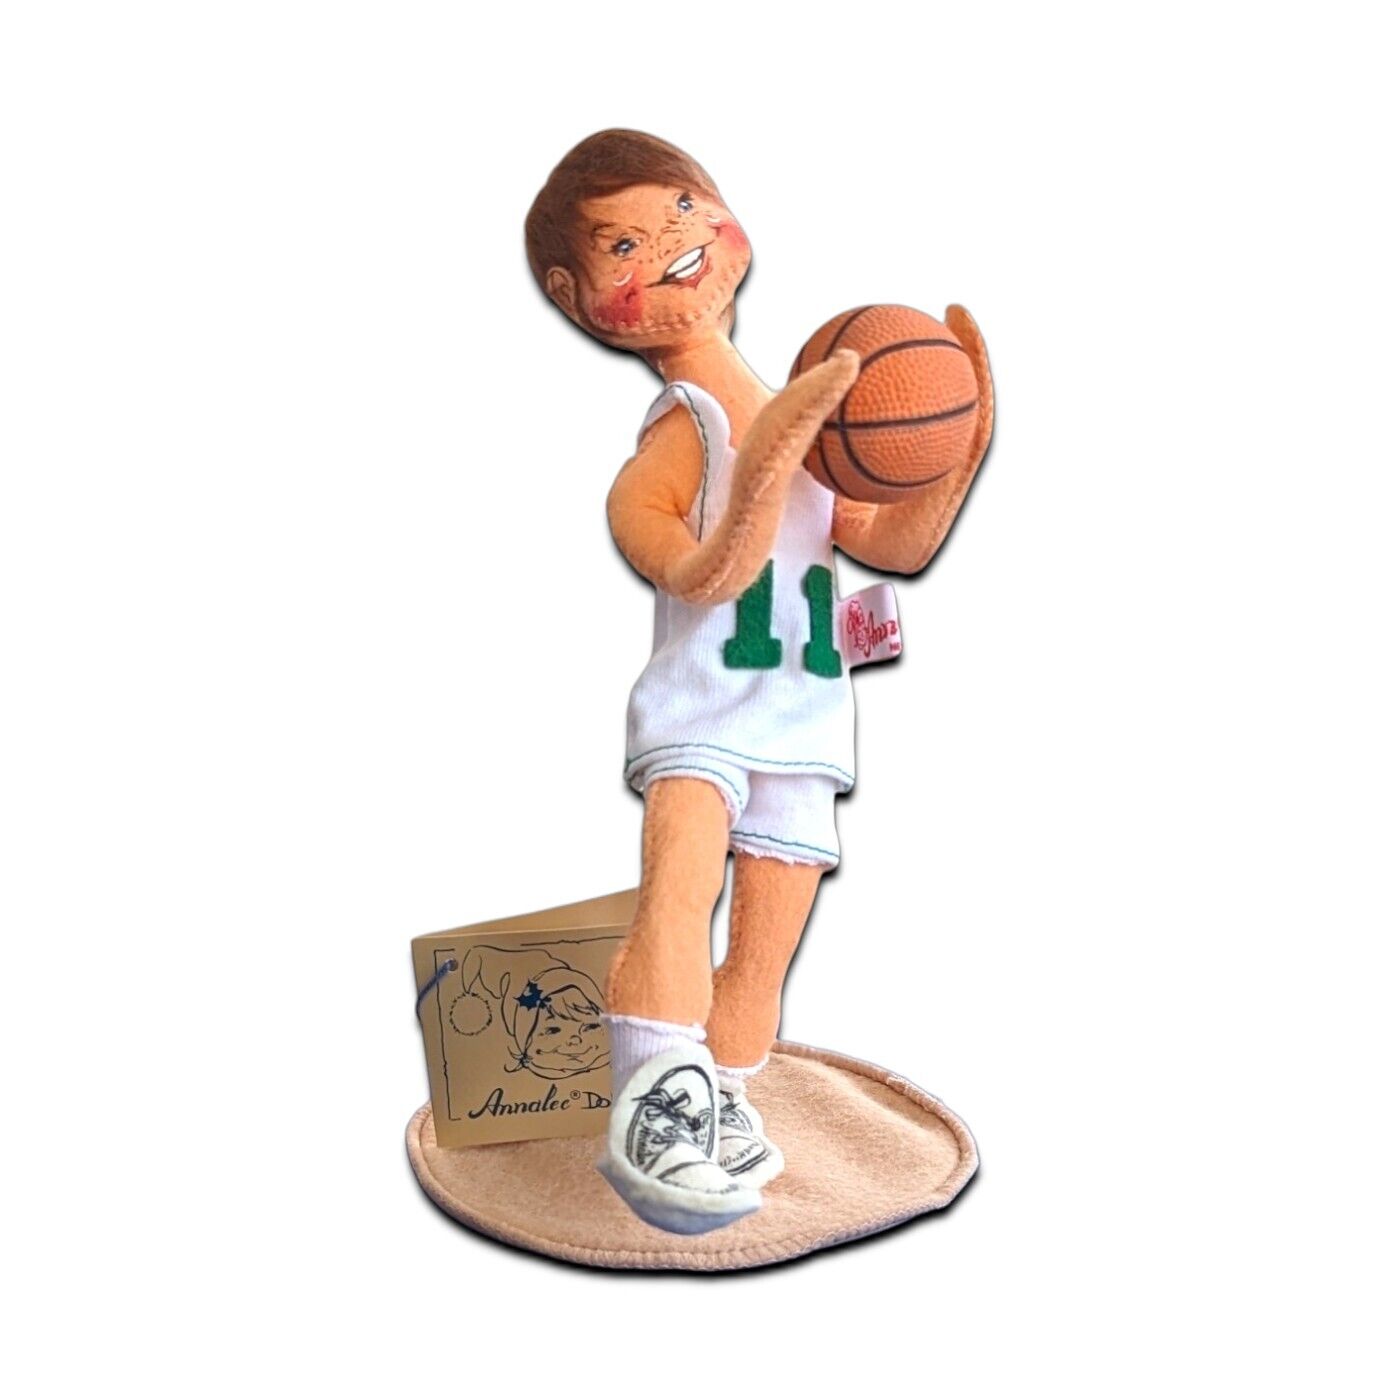 Annalee Doll 1994 Basketball Player No 11 Brown Hair Eyes Open Smiling 10 Inch